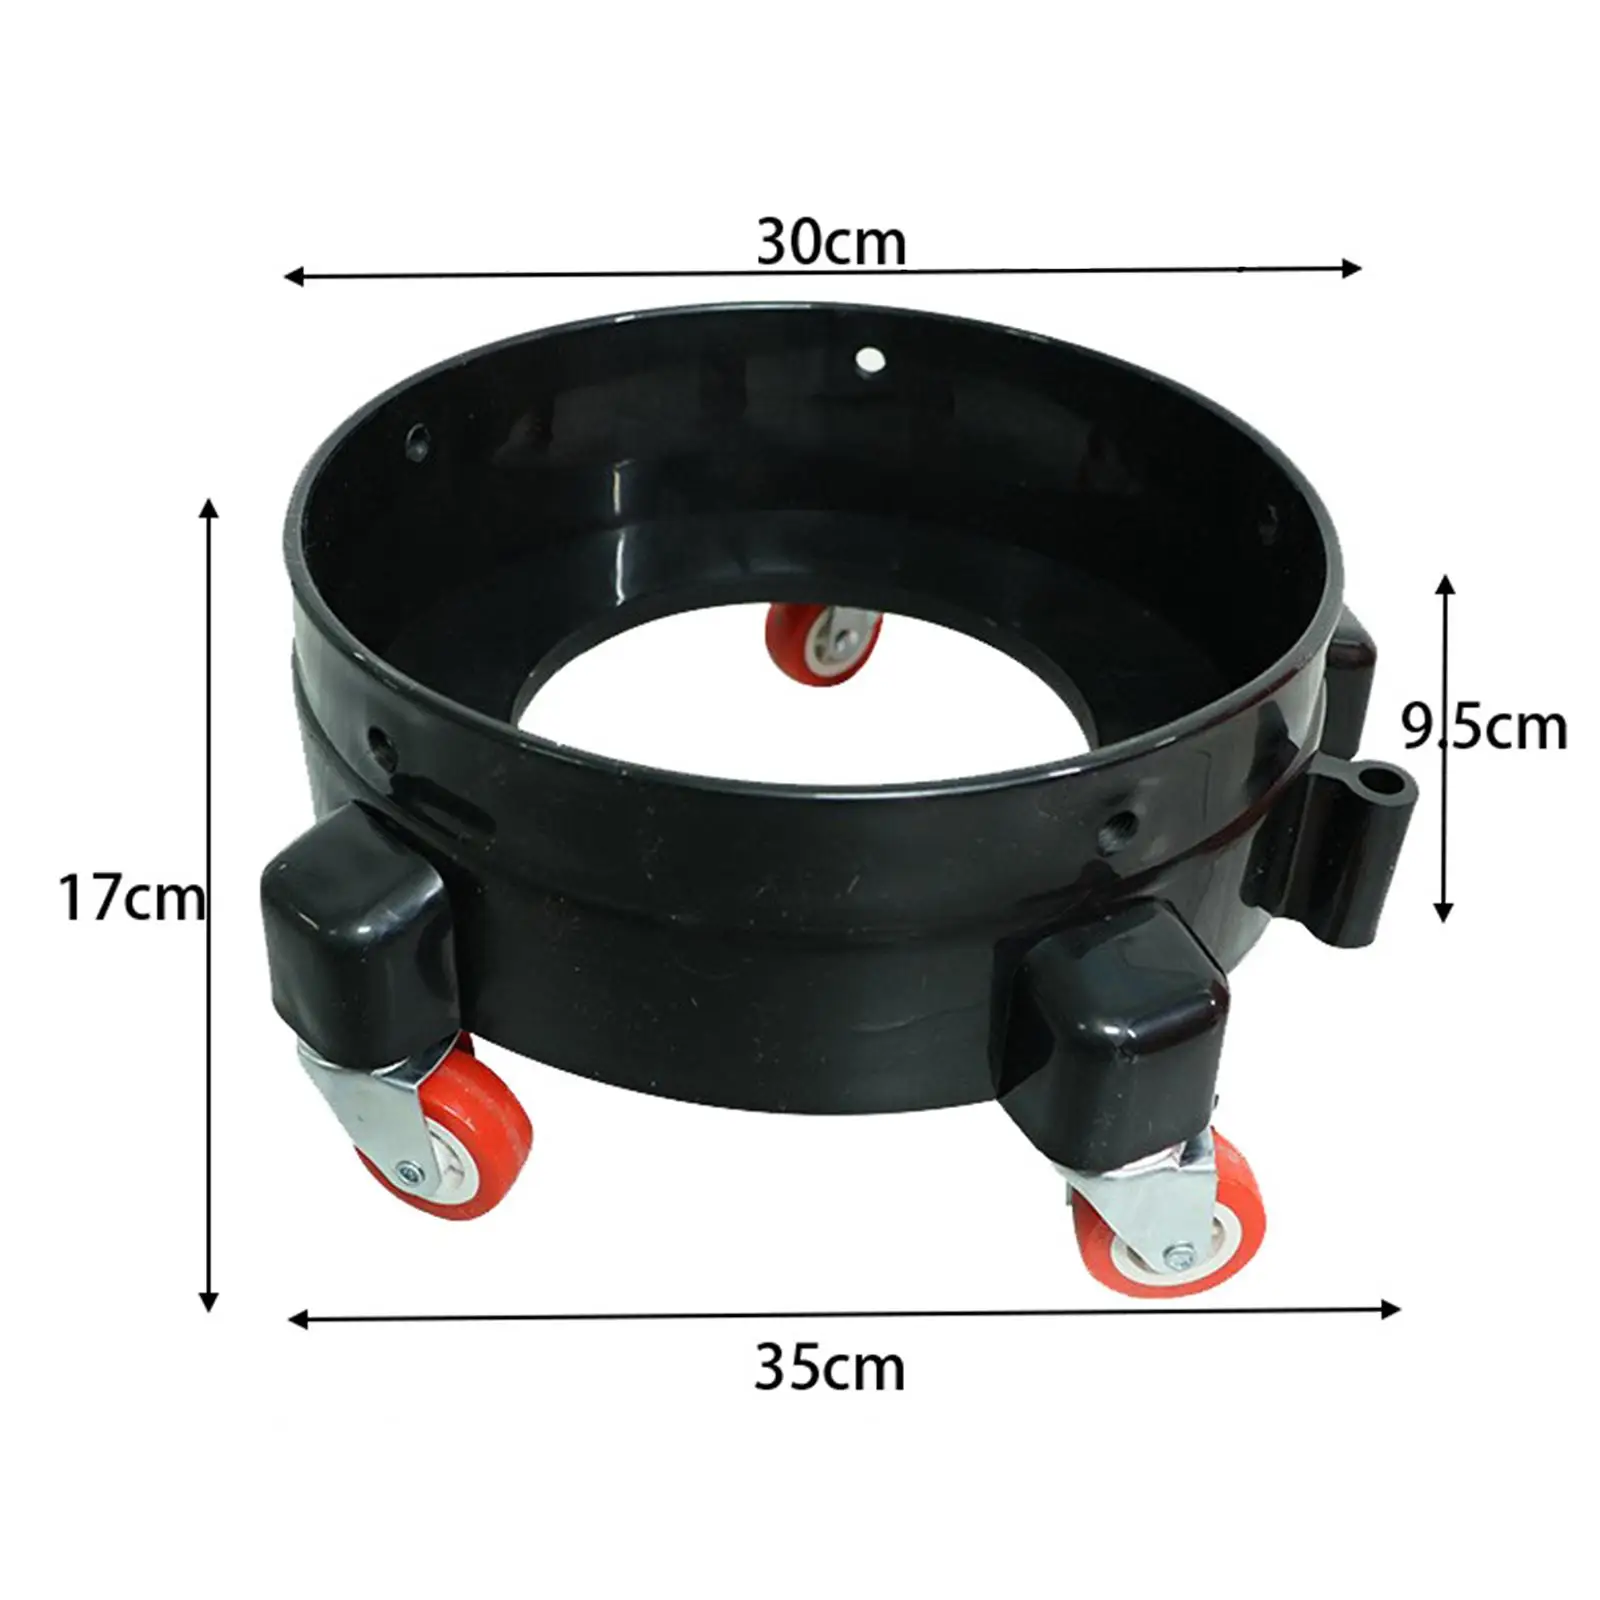 Swivel Casters Automotive Waxing Car Wash Rolling Bucket Dolly for Cleaner Schools Cleaners Trucks Construction Workers Waxing